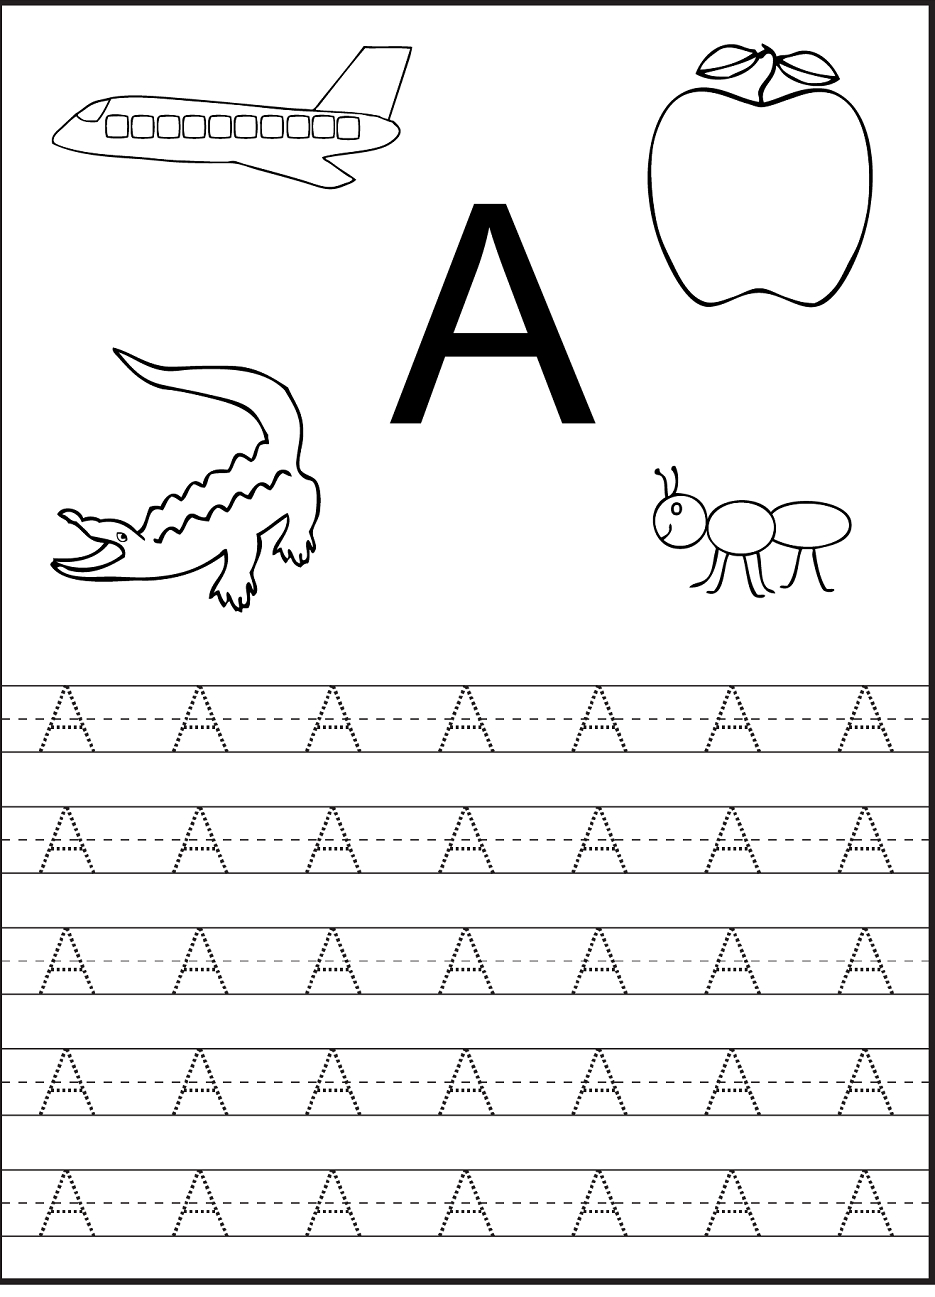 Tracing The Letter A Free Printable | Alphabet And Numbers Learning - Free Printable Alphabet Worksheets For Grade 1